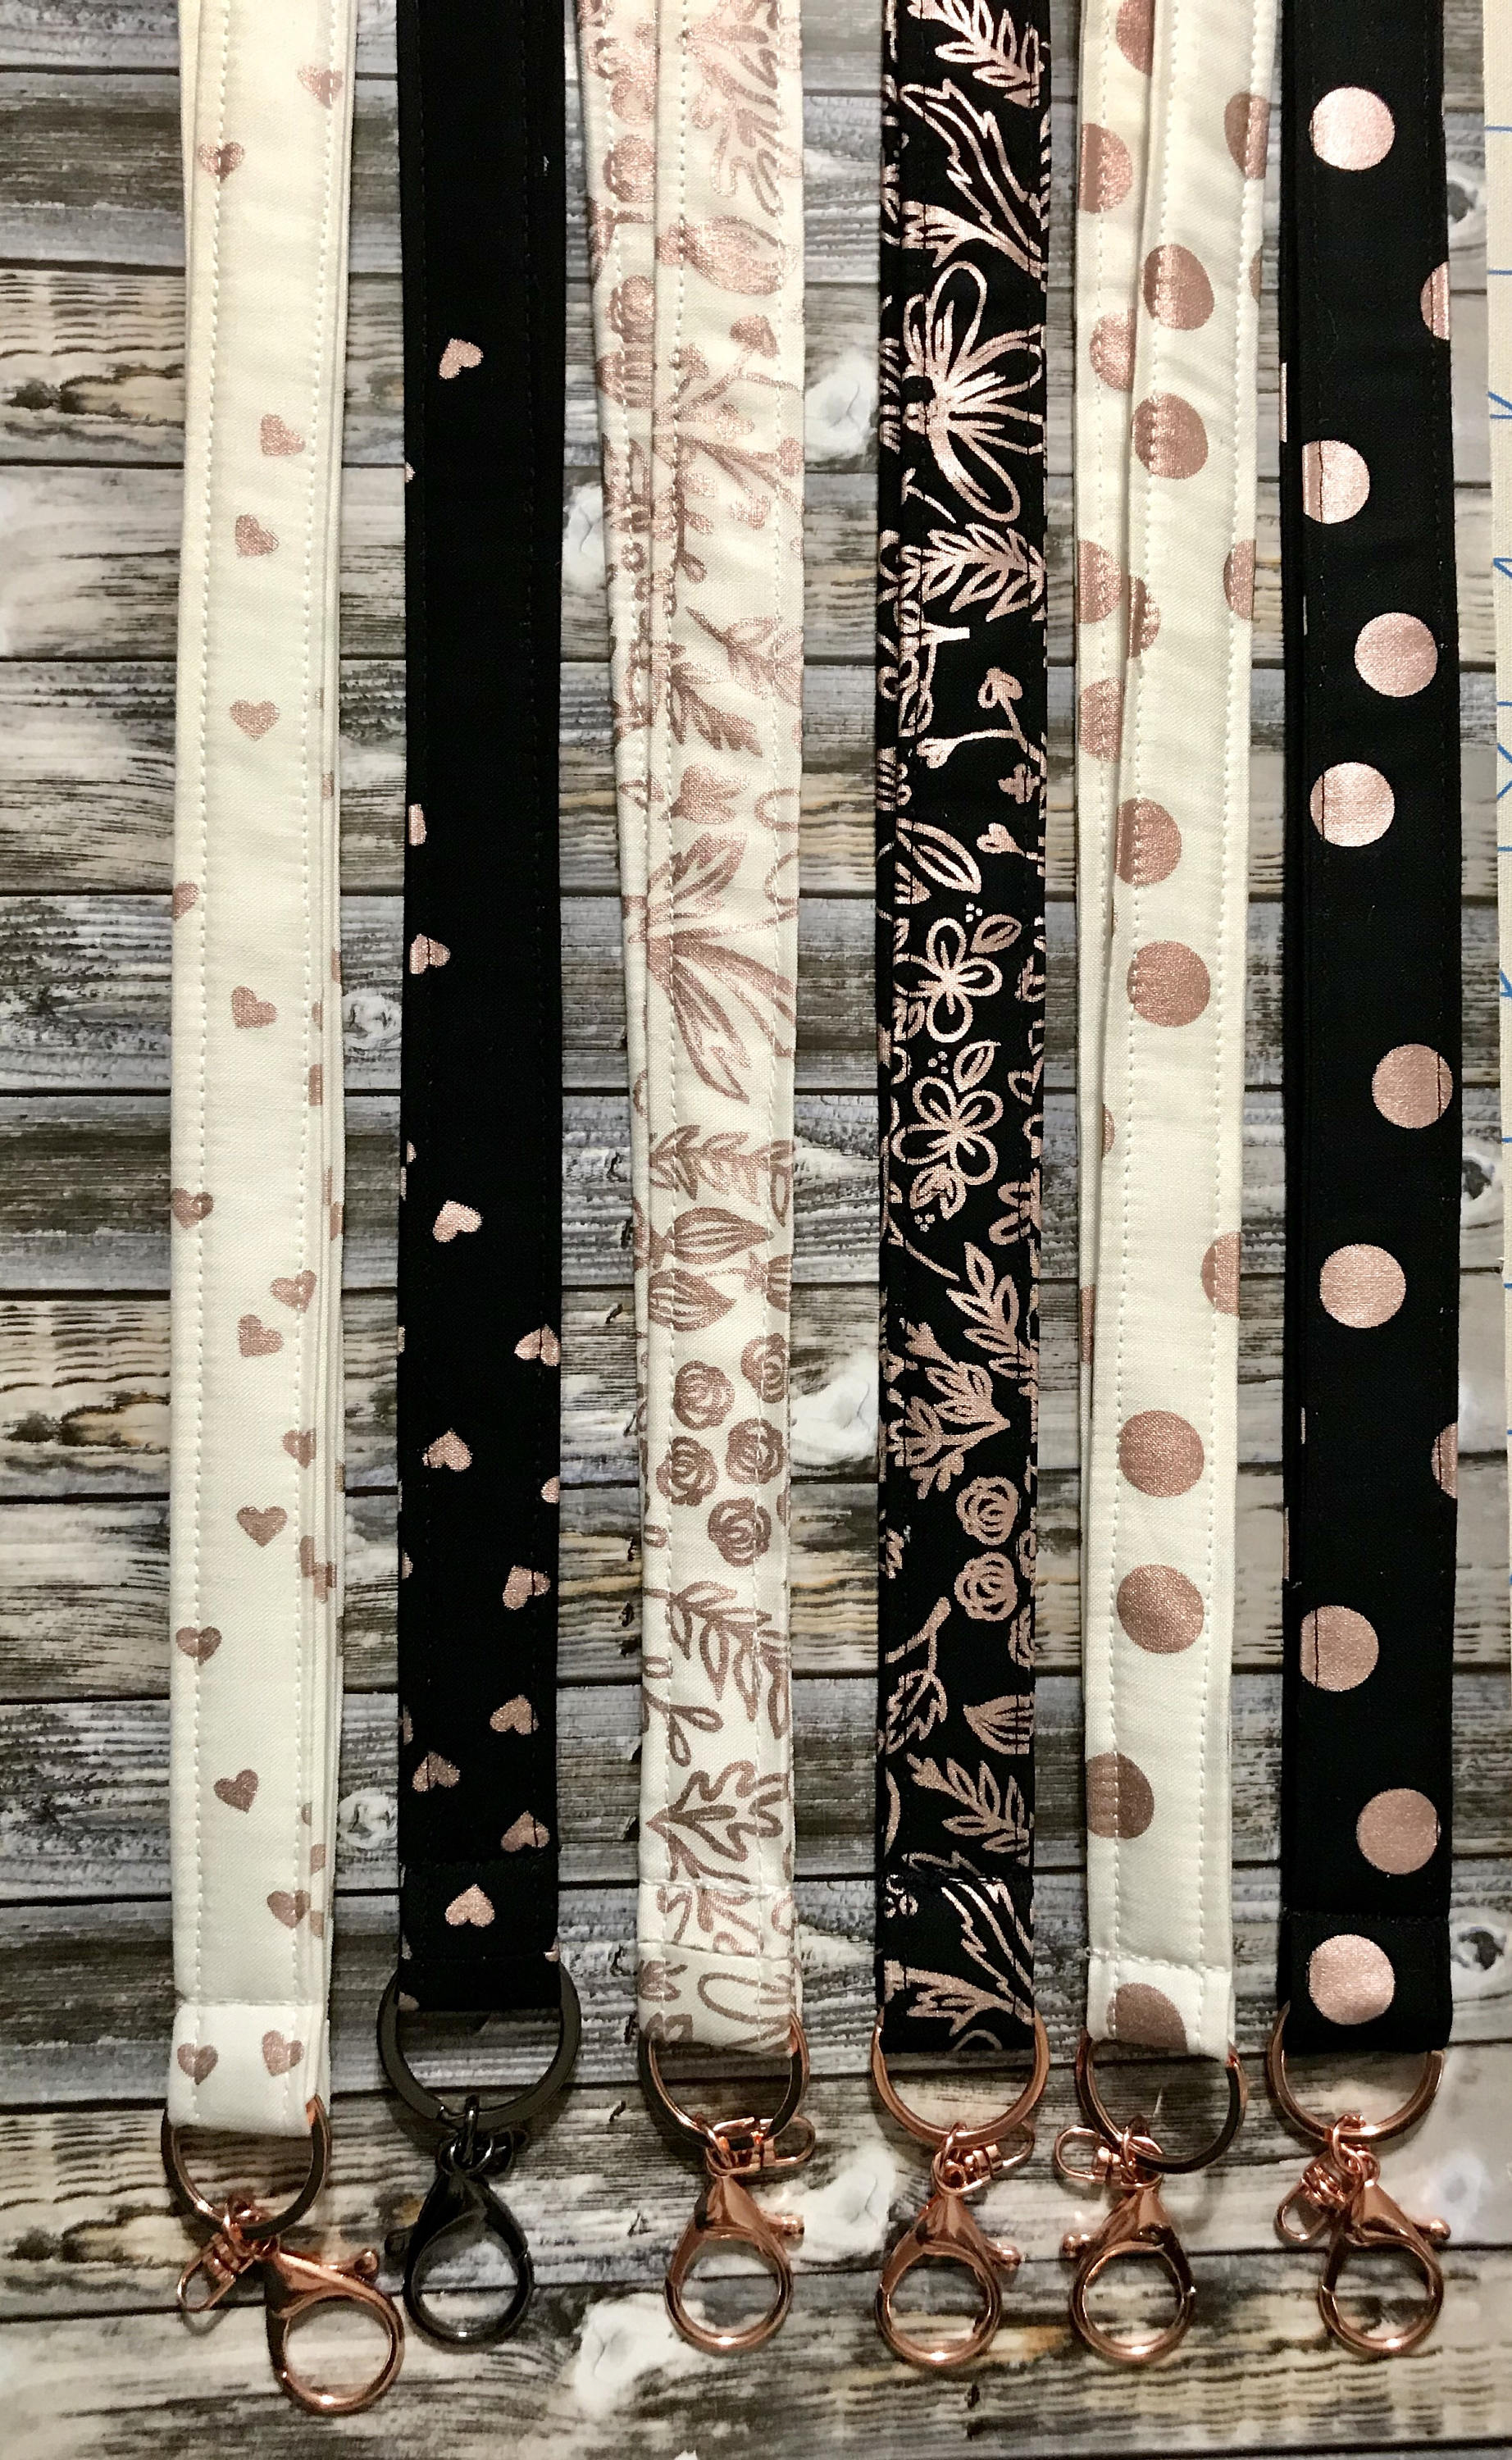 Reversible Lanyard • Rose Gold Metallic Print • Floral Vine and Stripes on  Creamy White • ID Strap • ID Badge Holder • Key Chain • .75x36